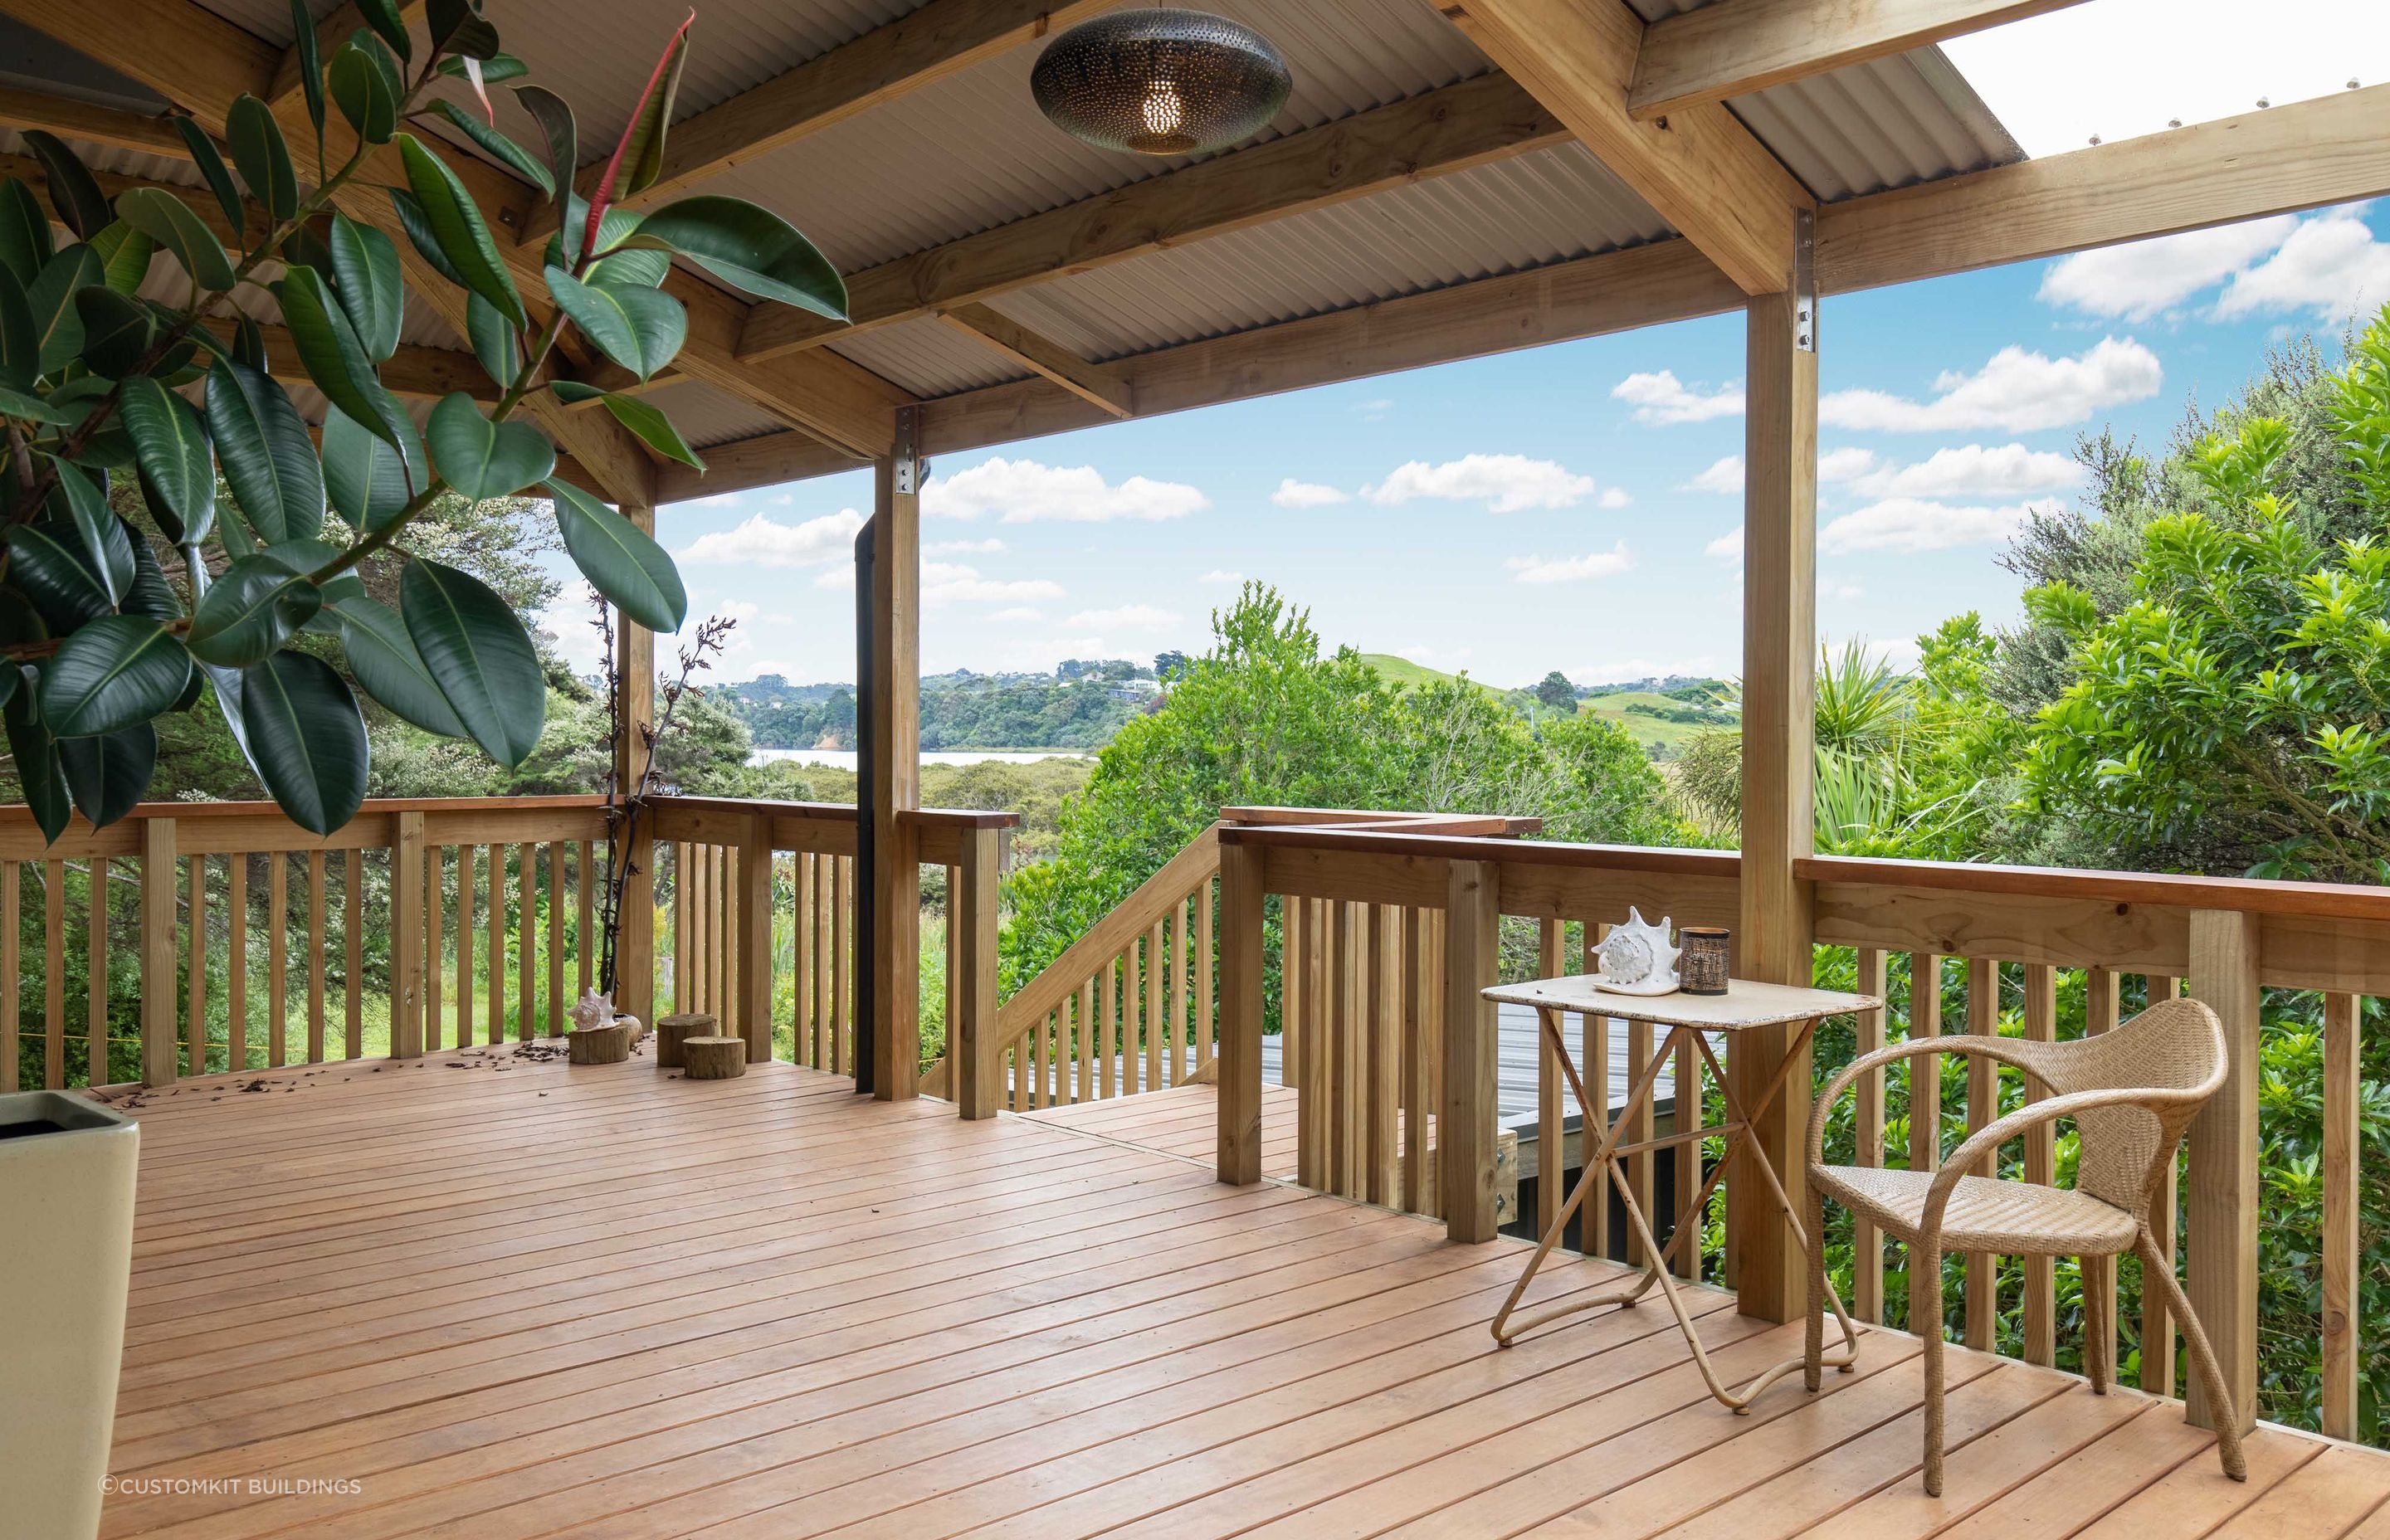 An all-weather deck with spectacular sea views.